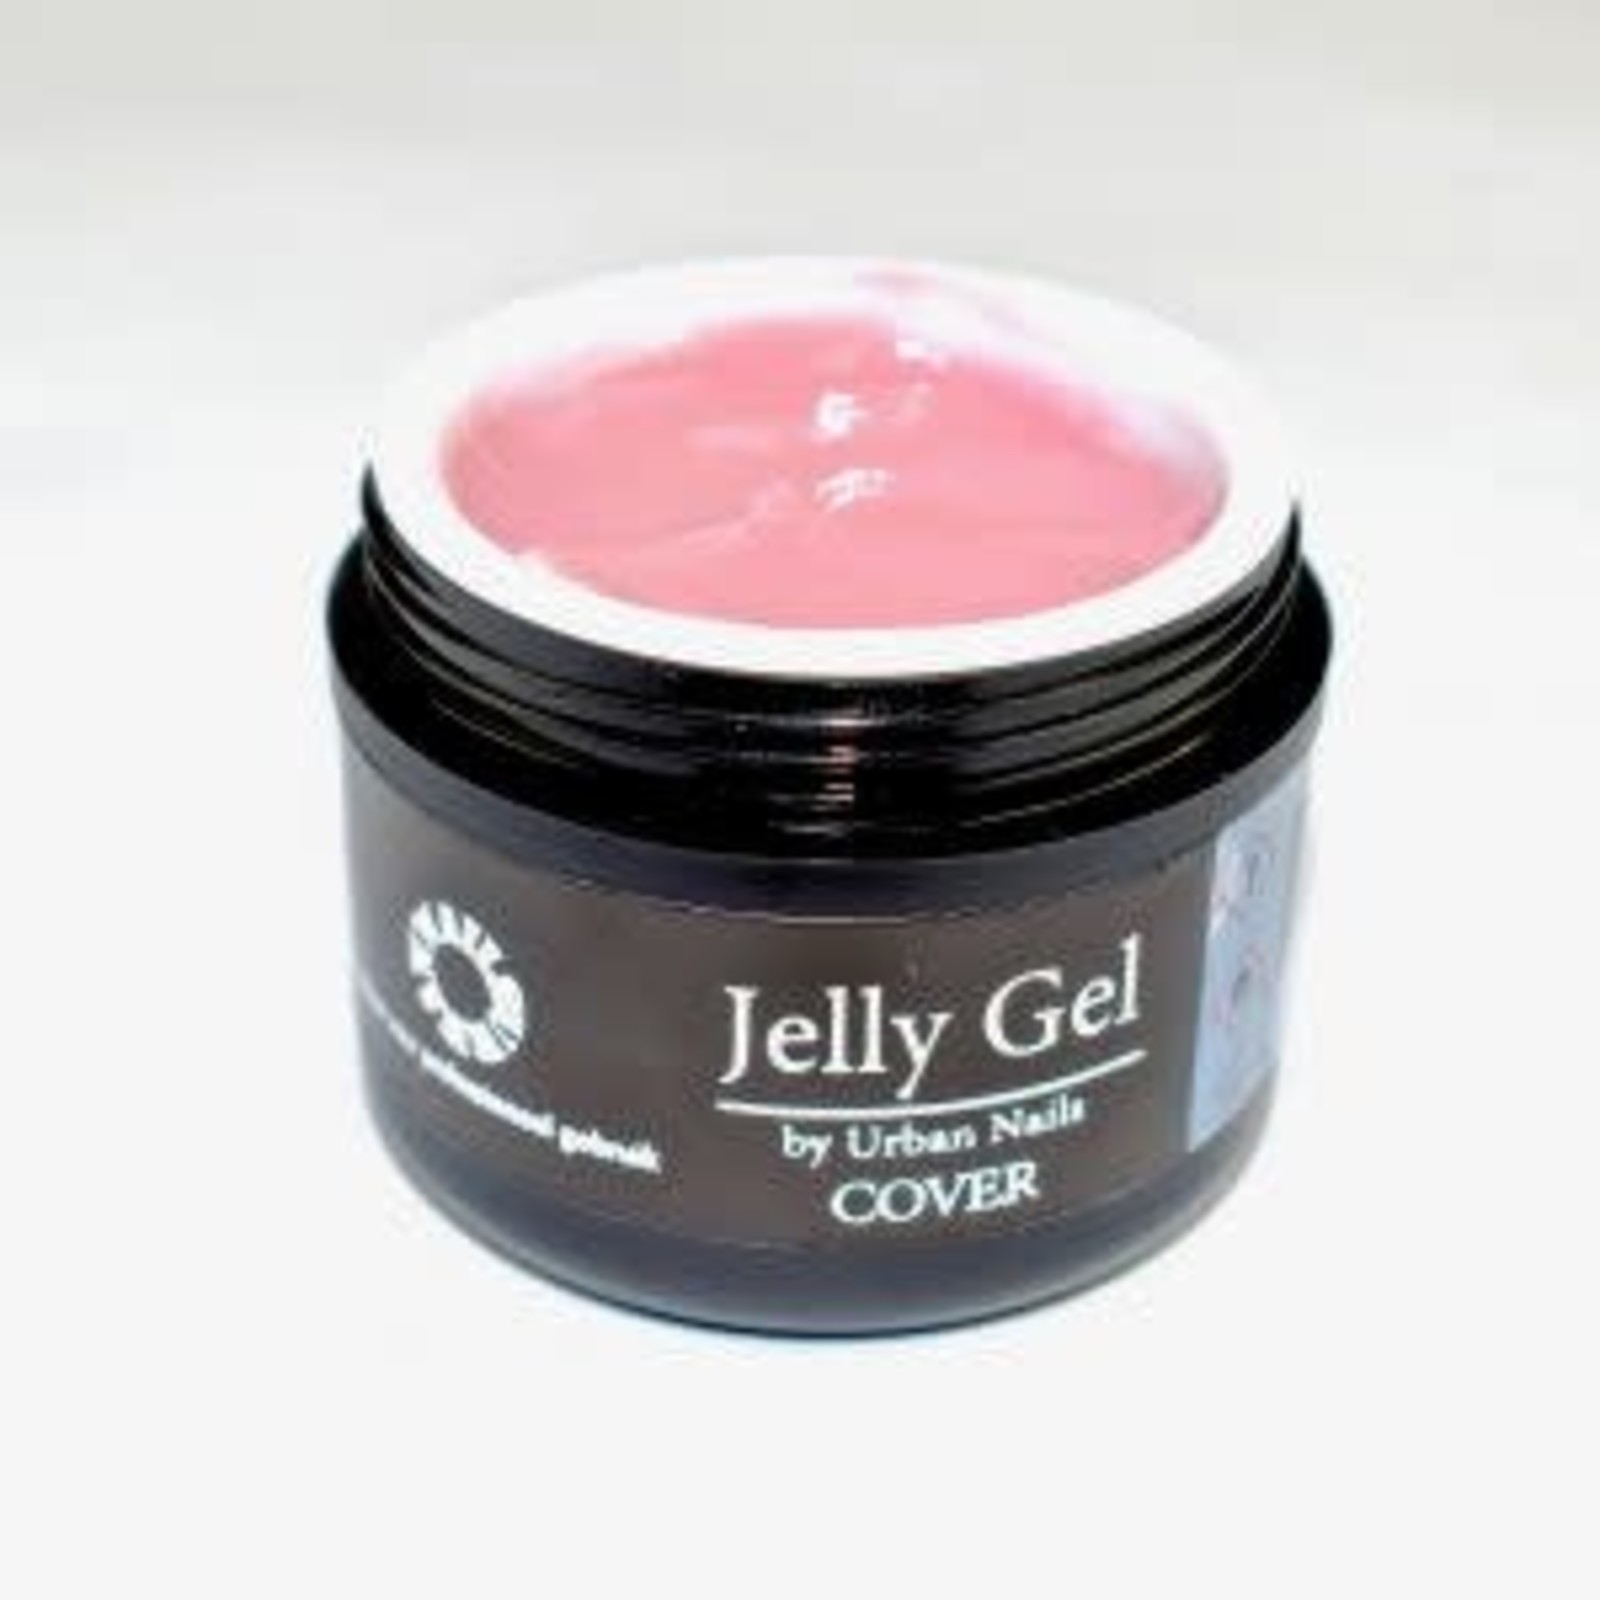 Urban nails Jelly gel cover 15 gr